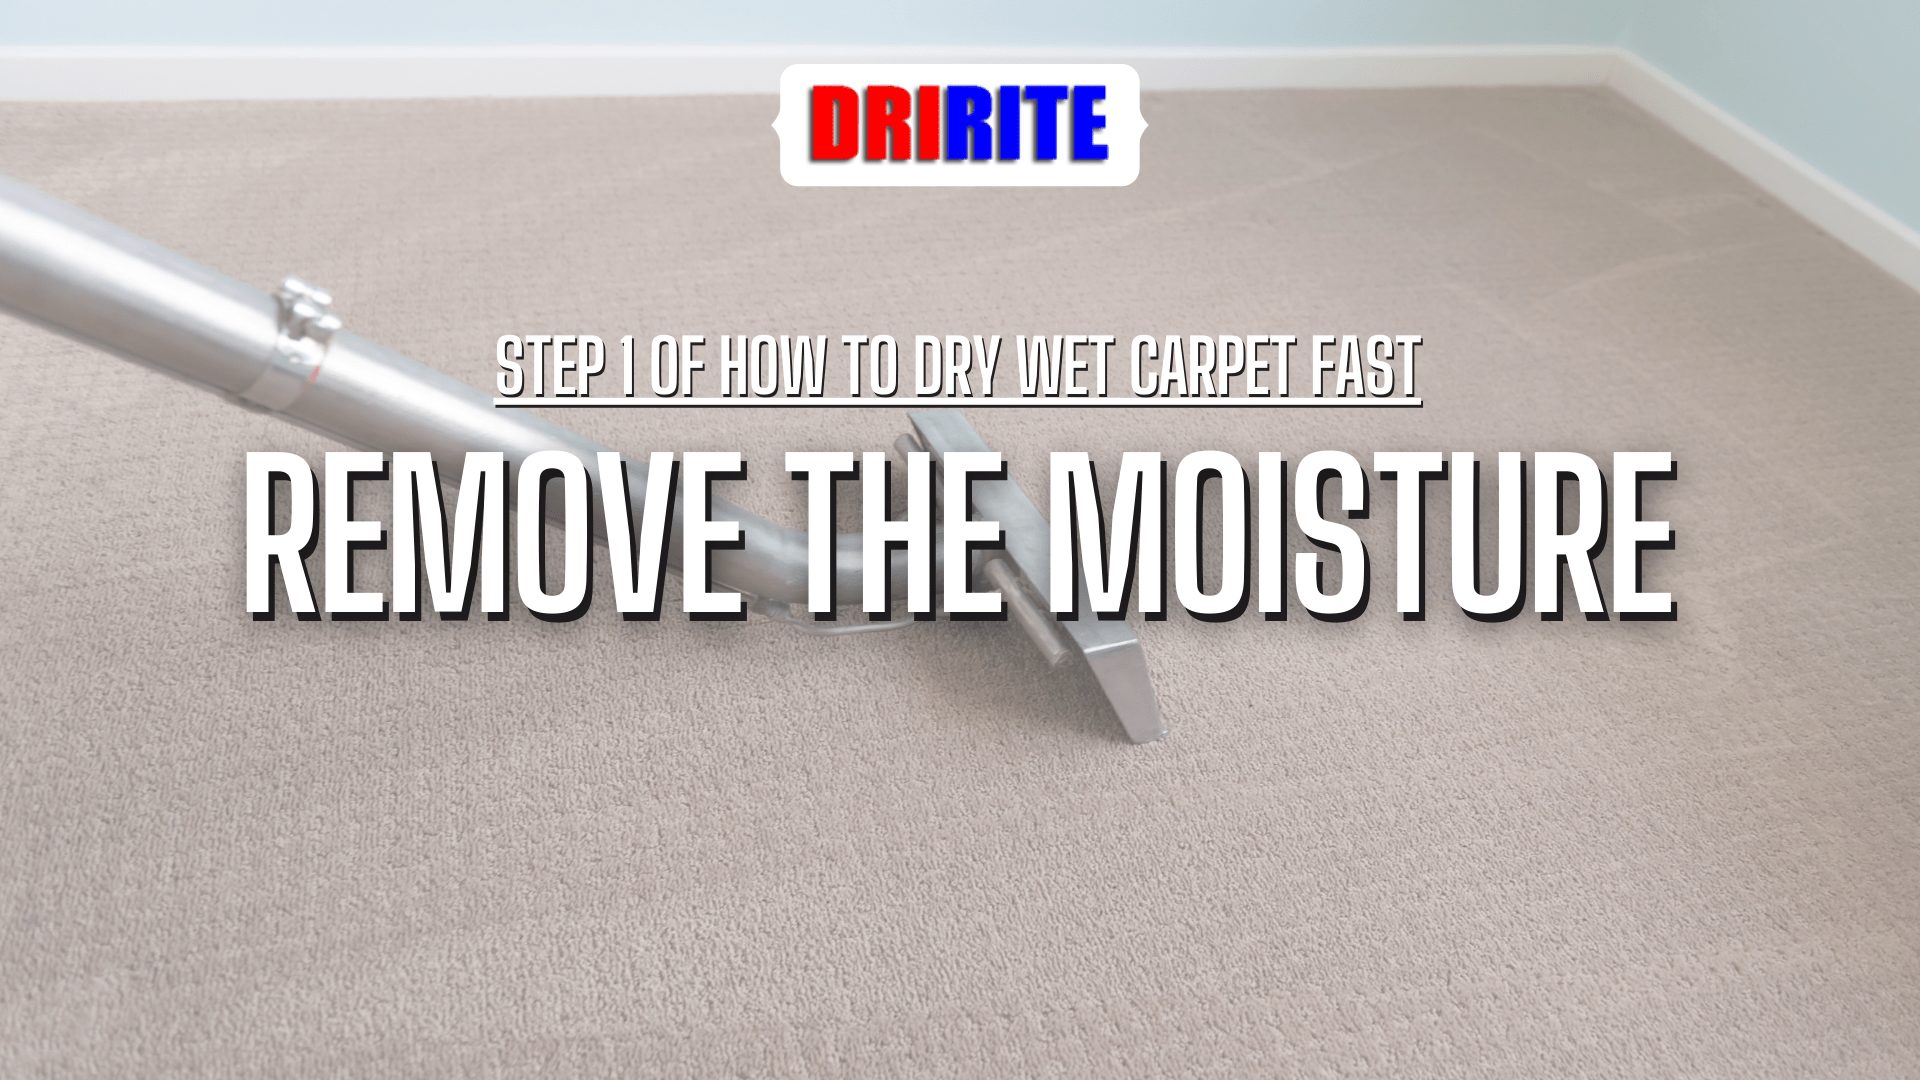 Remove The Moisture - How To Dry Wet Carpet Fast After Water Damage